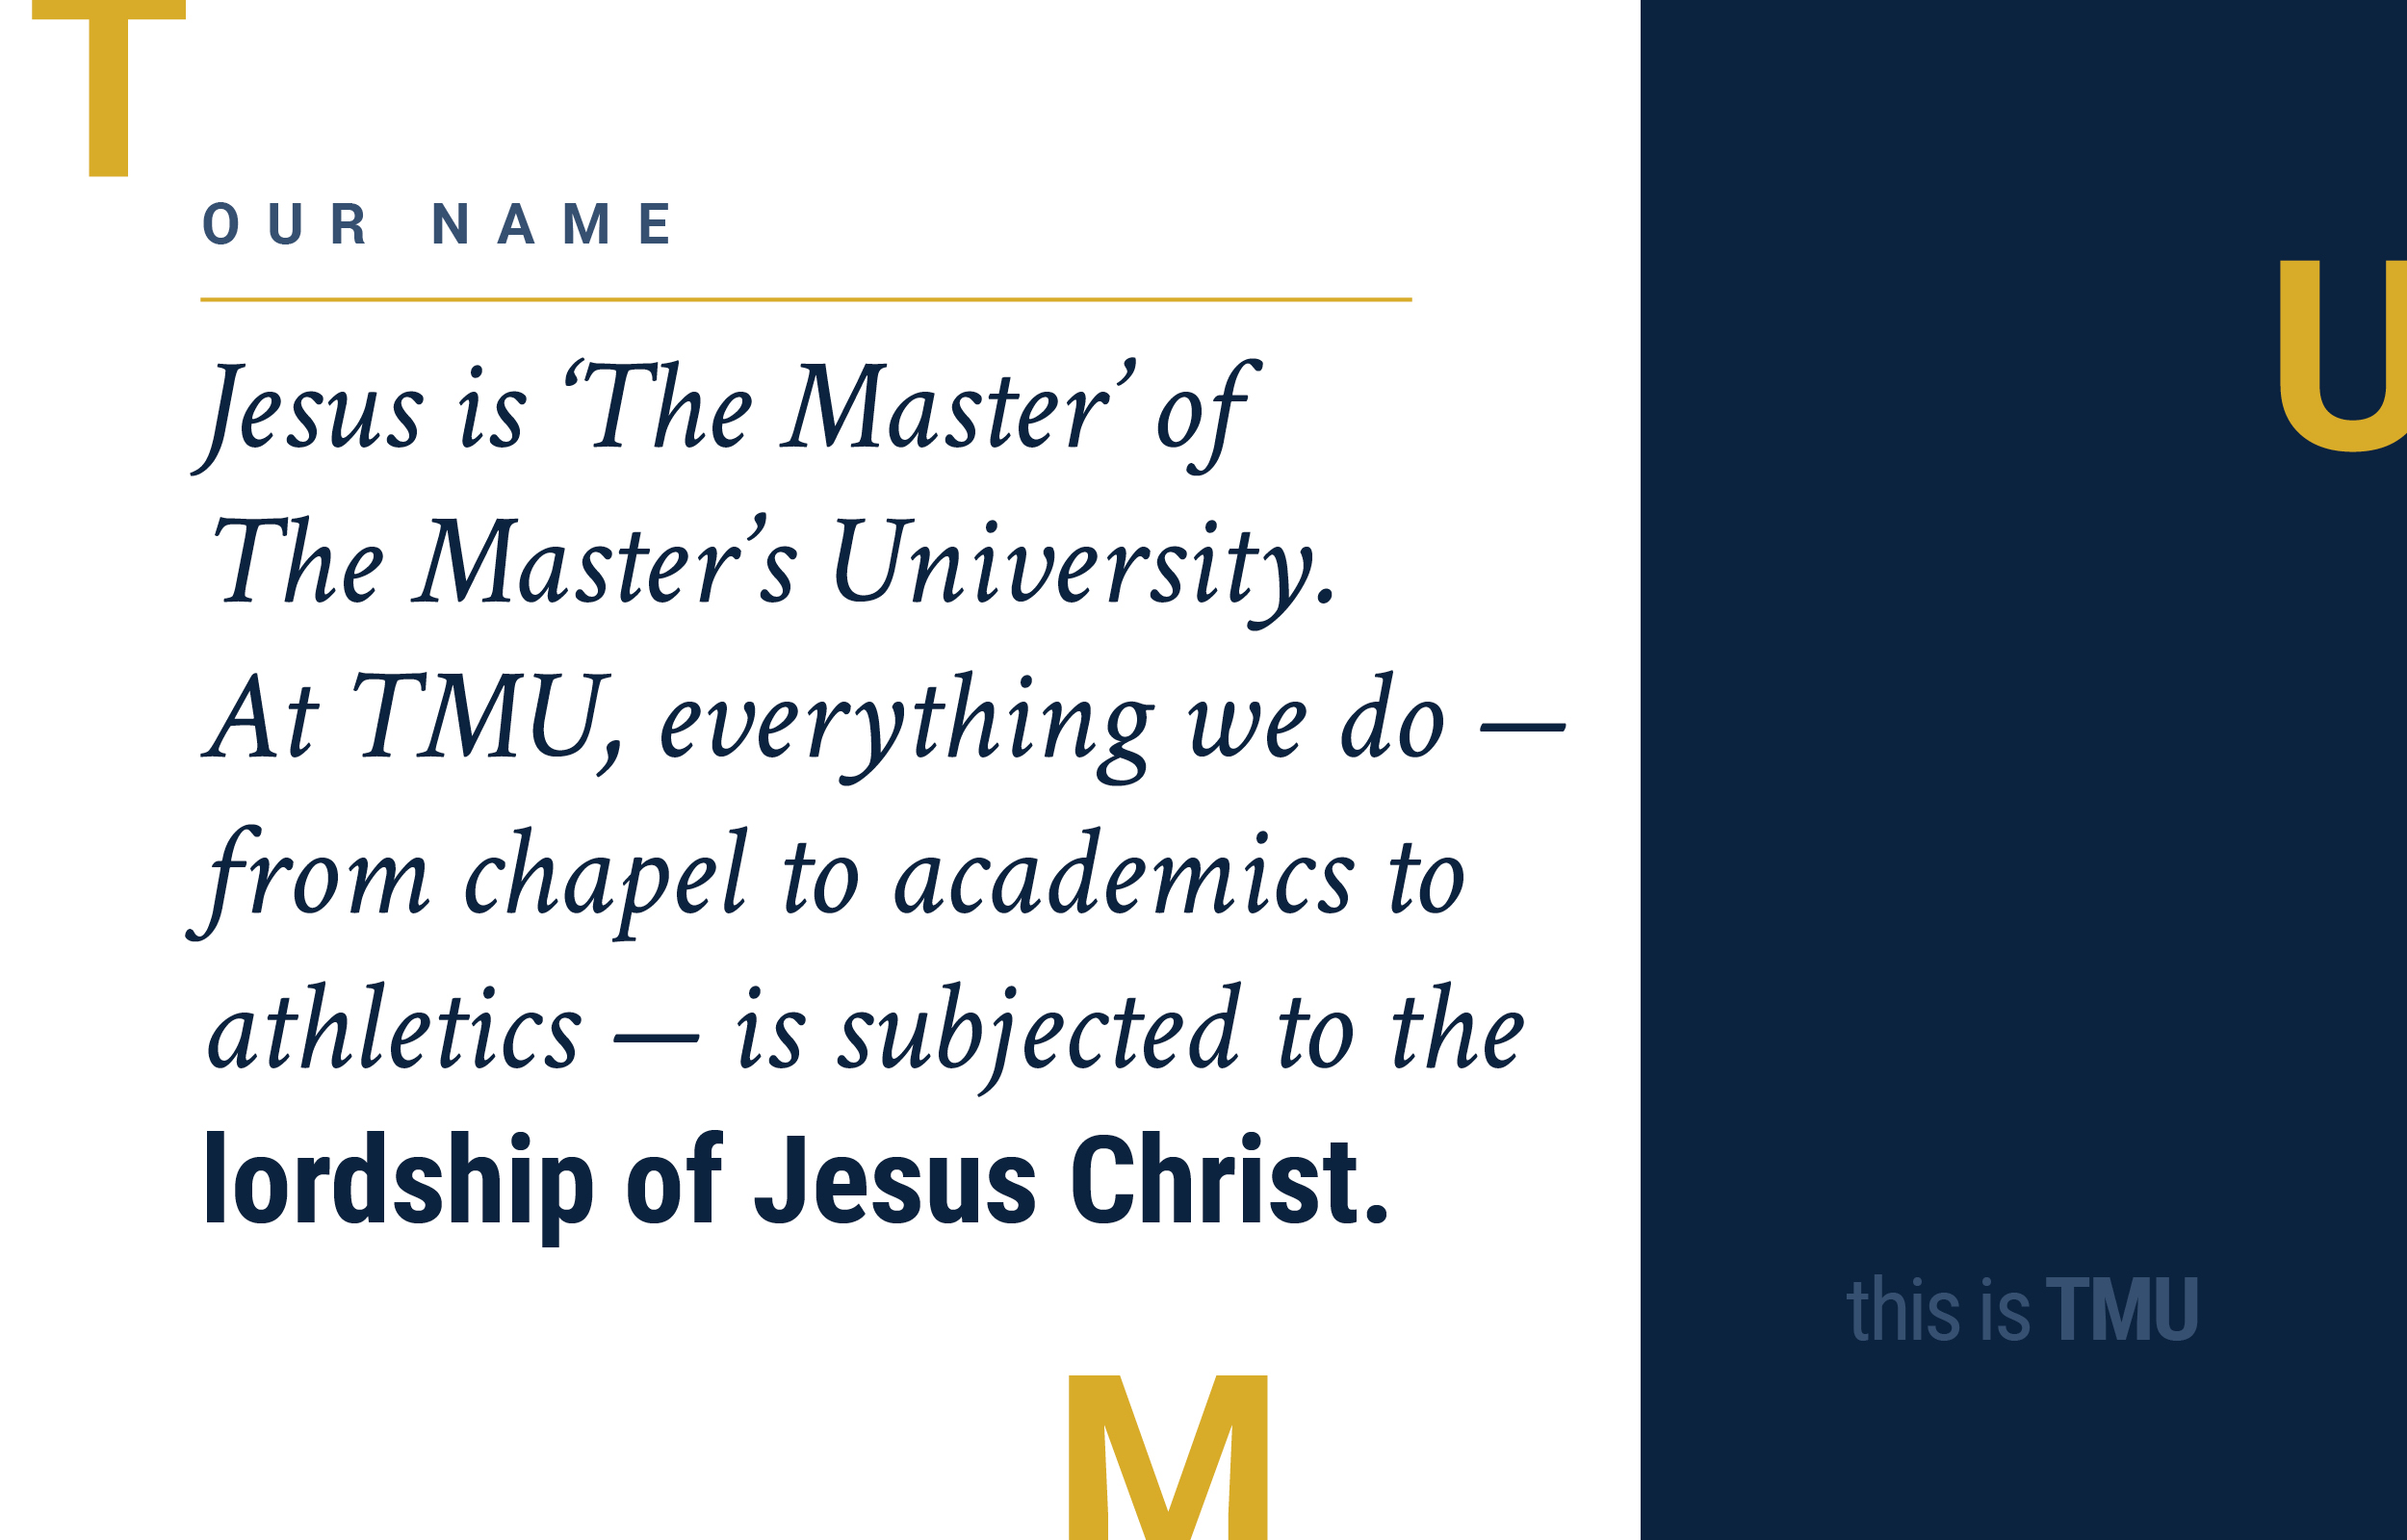 This is TMU: Our Name Featured Image